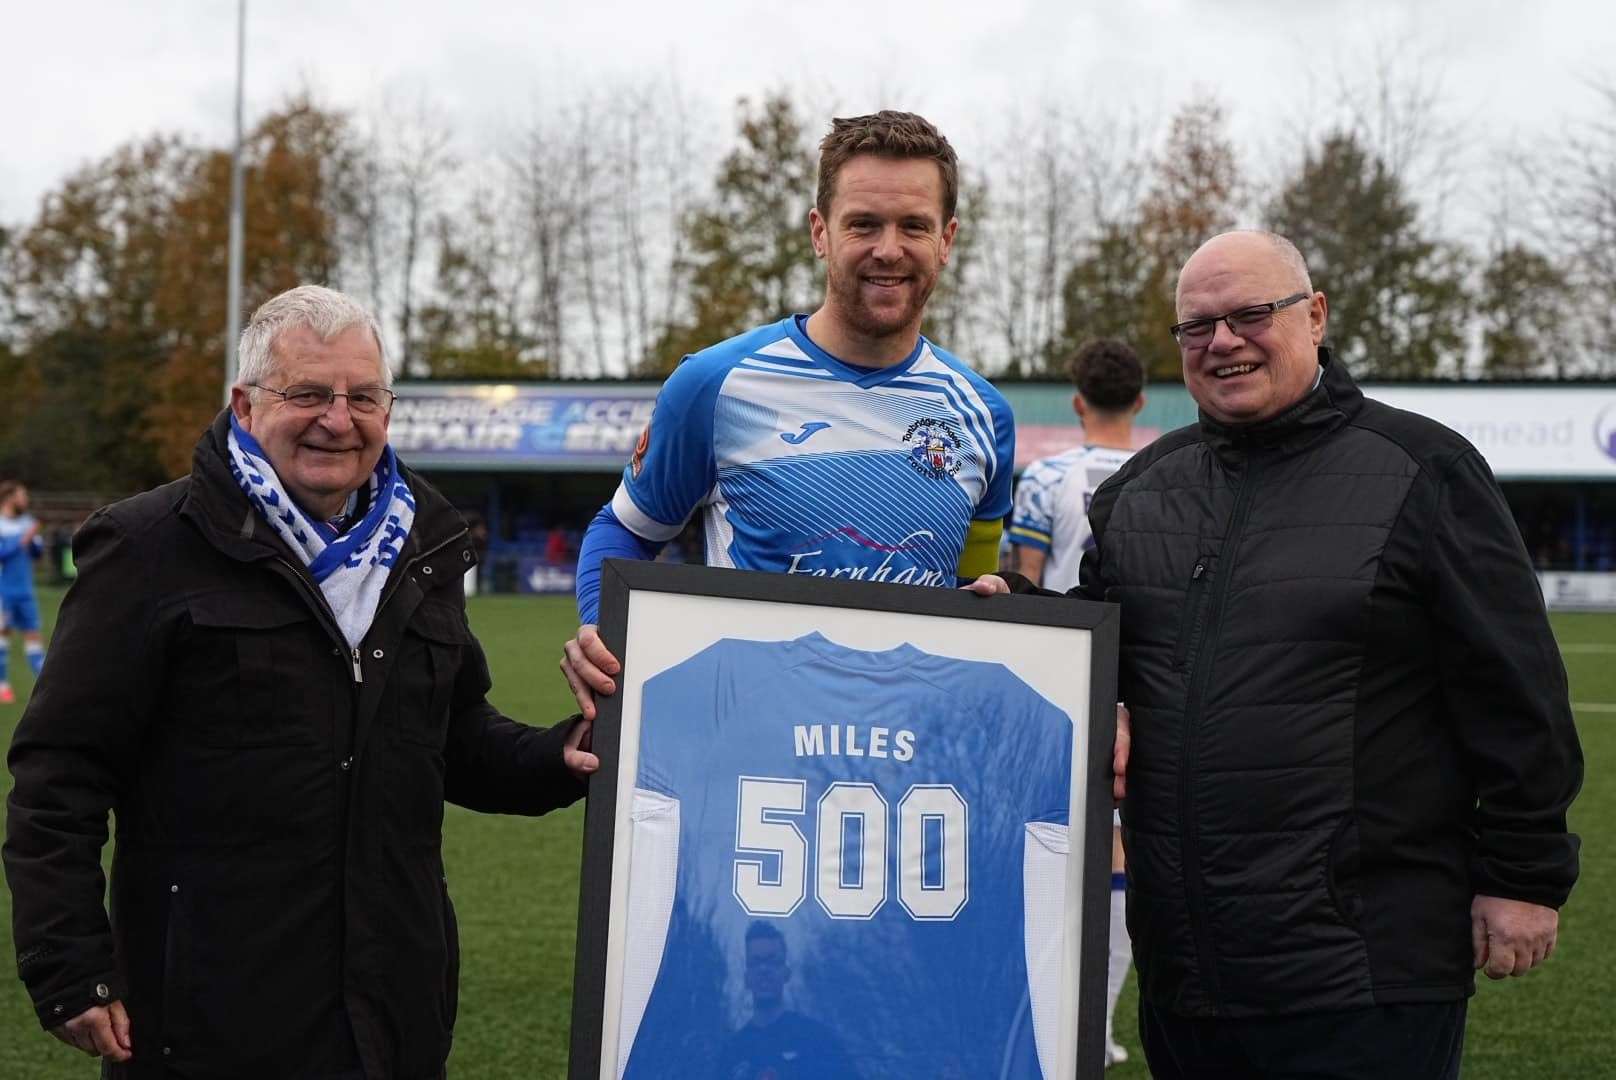 Tonbridge skipper Sonny Miles is presented with a framed shirt marking his 500th appearance by chairman Dave Netherstreet and president Steve Churcher. Picture: Wes Filtness